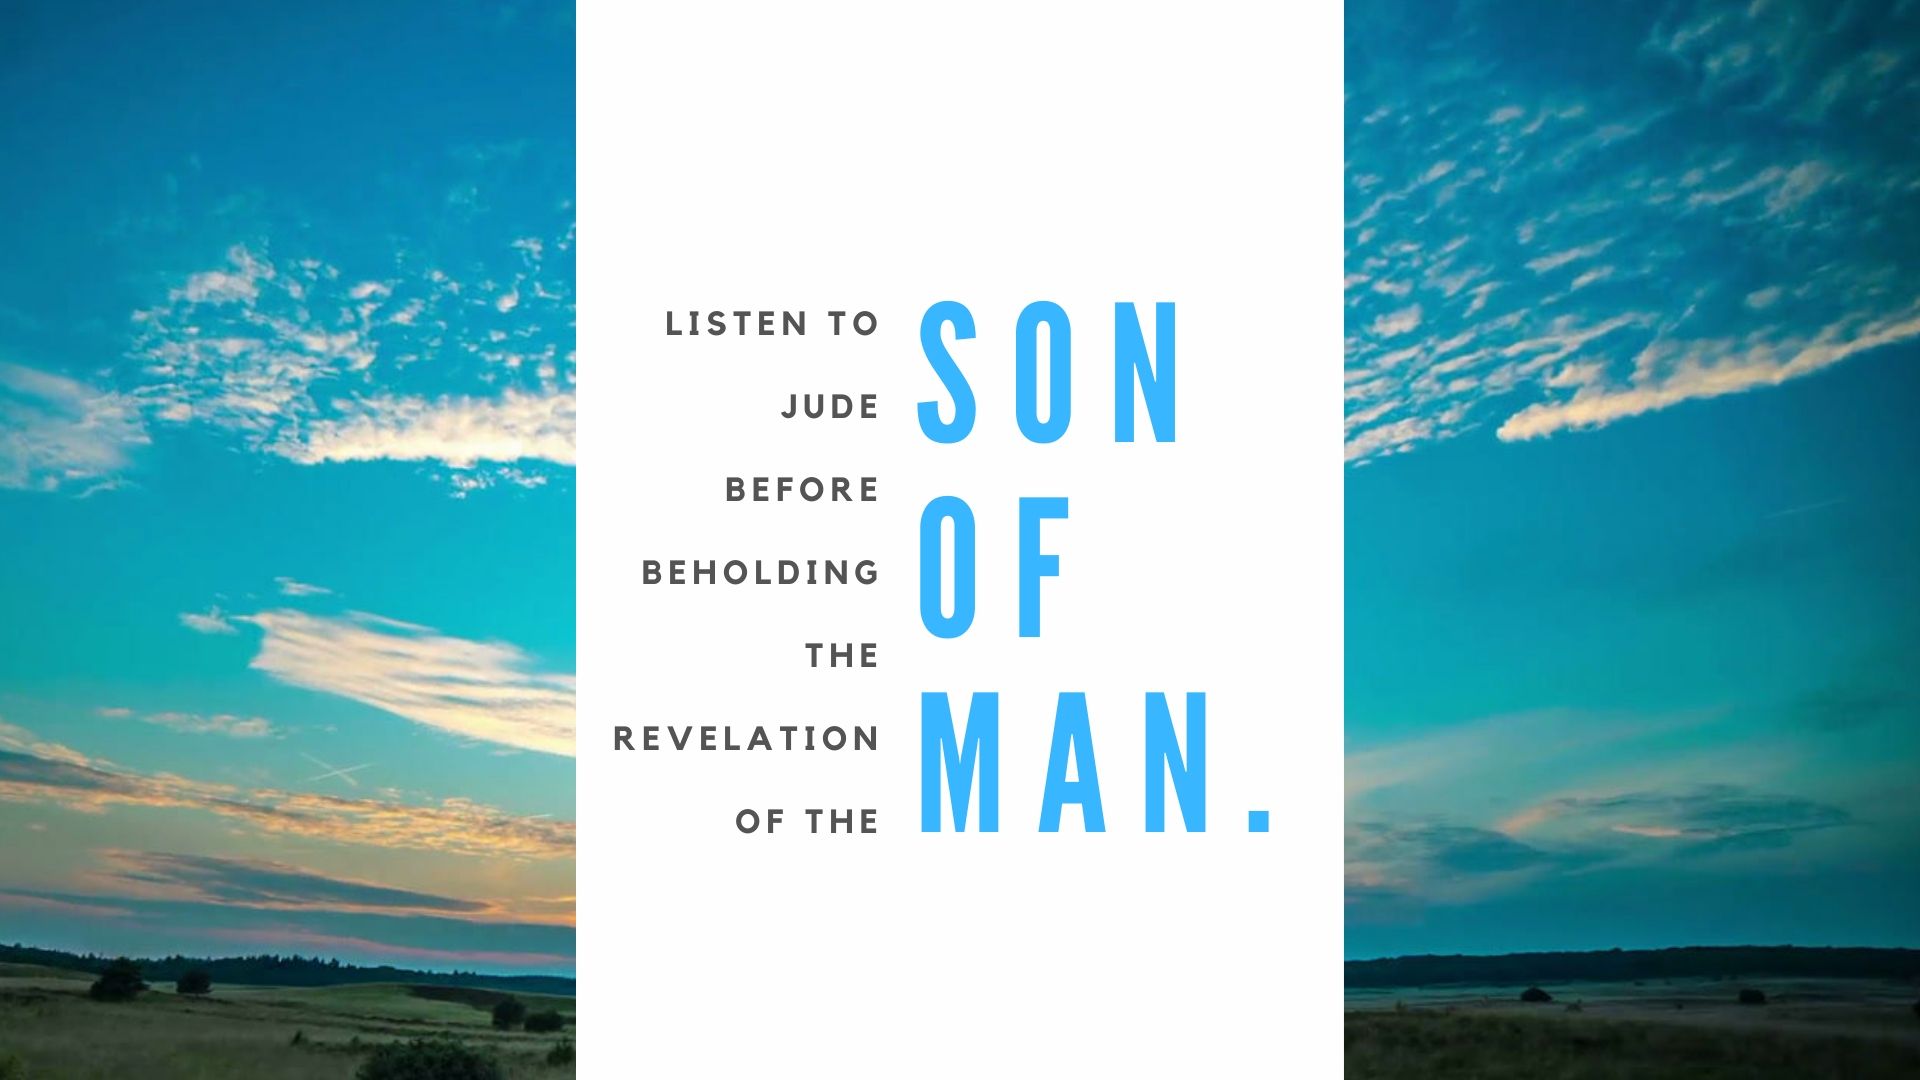 Listen to Jude Before Beholding the Revelation of the SON OF MAN.